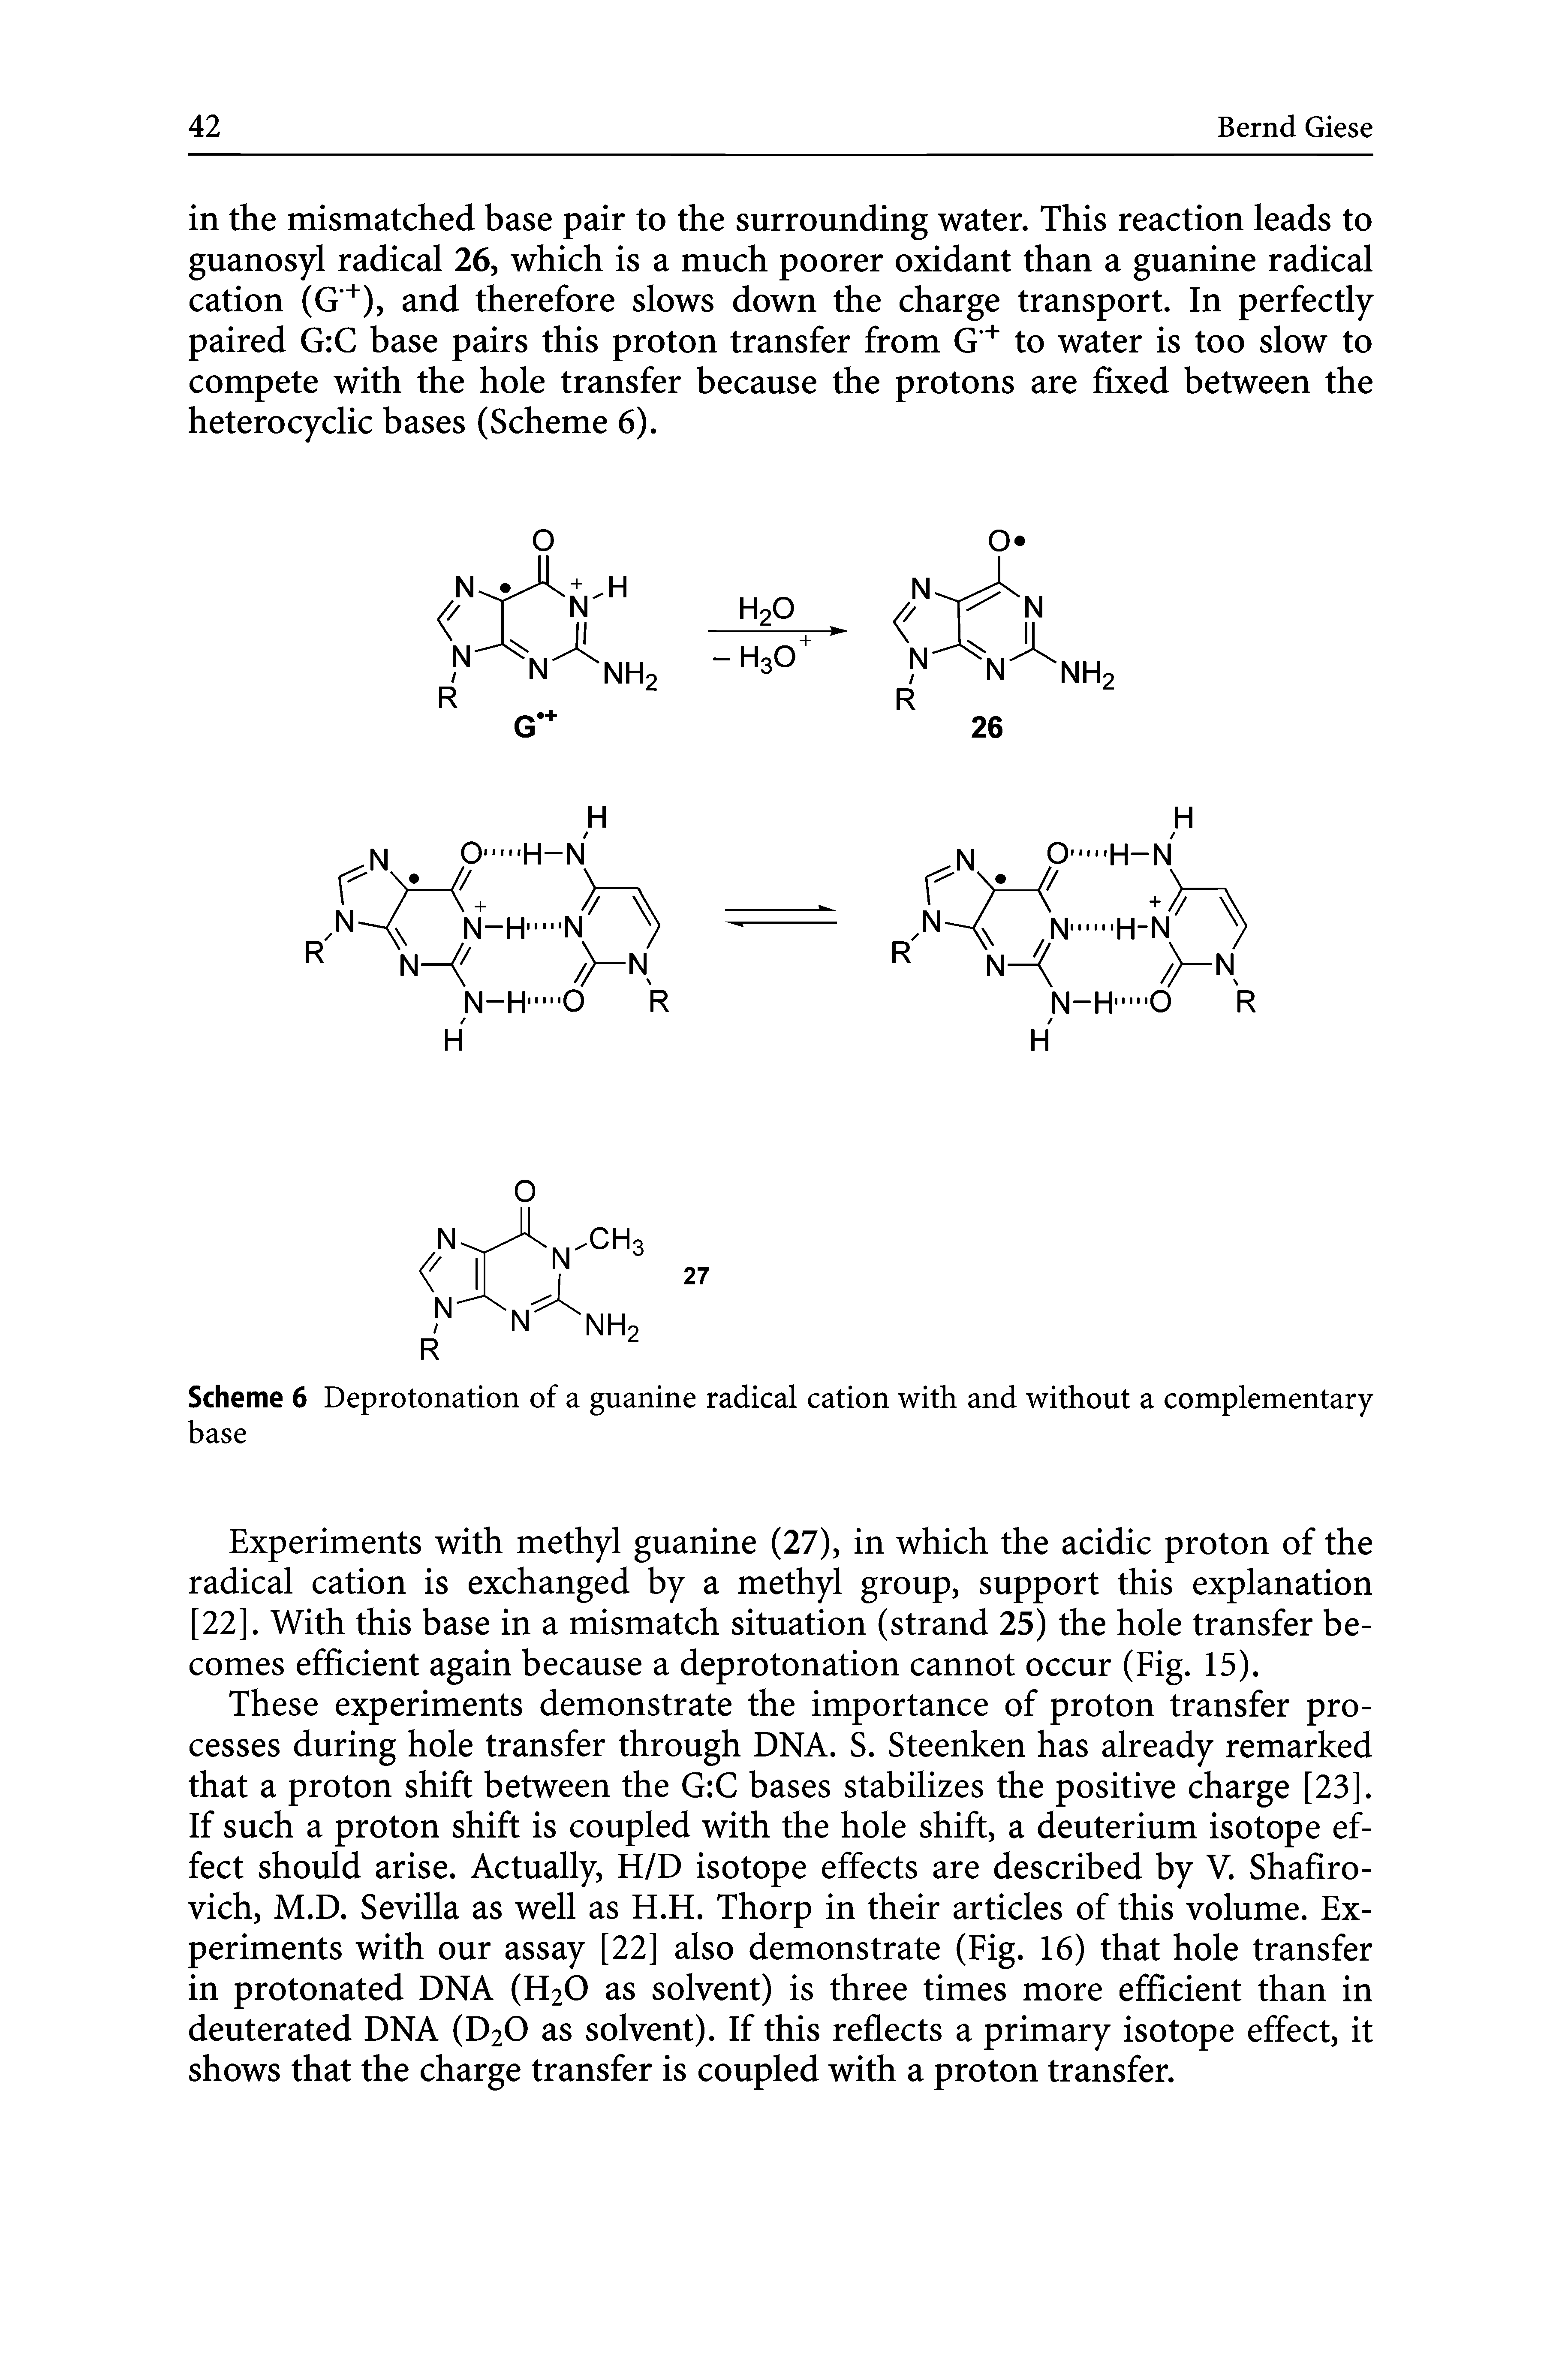 Scheme 6 Deprotonation of a guanine radical cation with and without a complementary base...